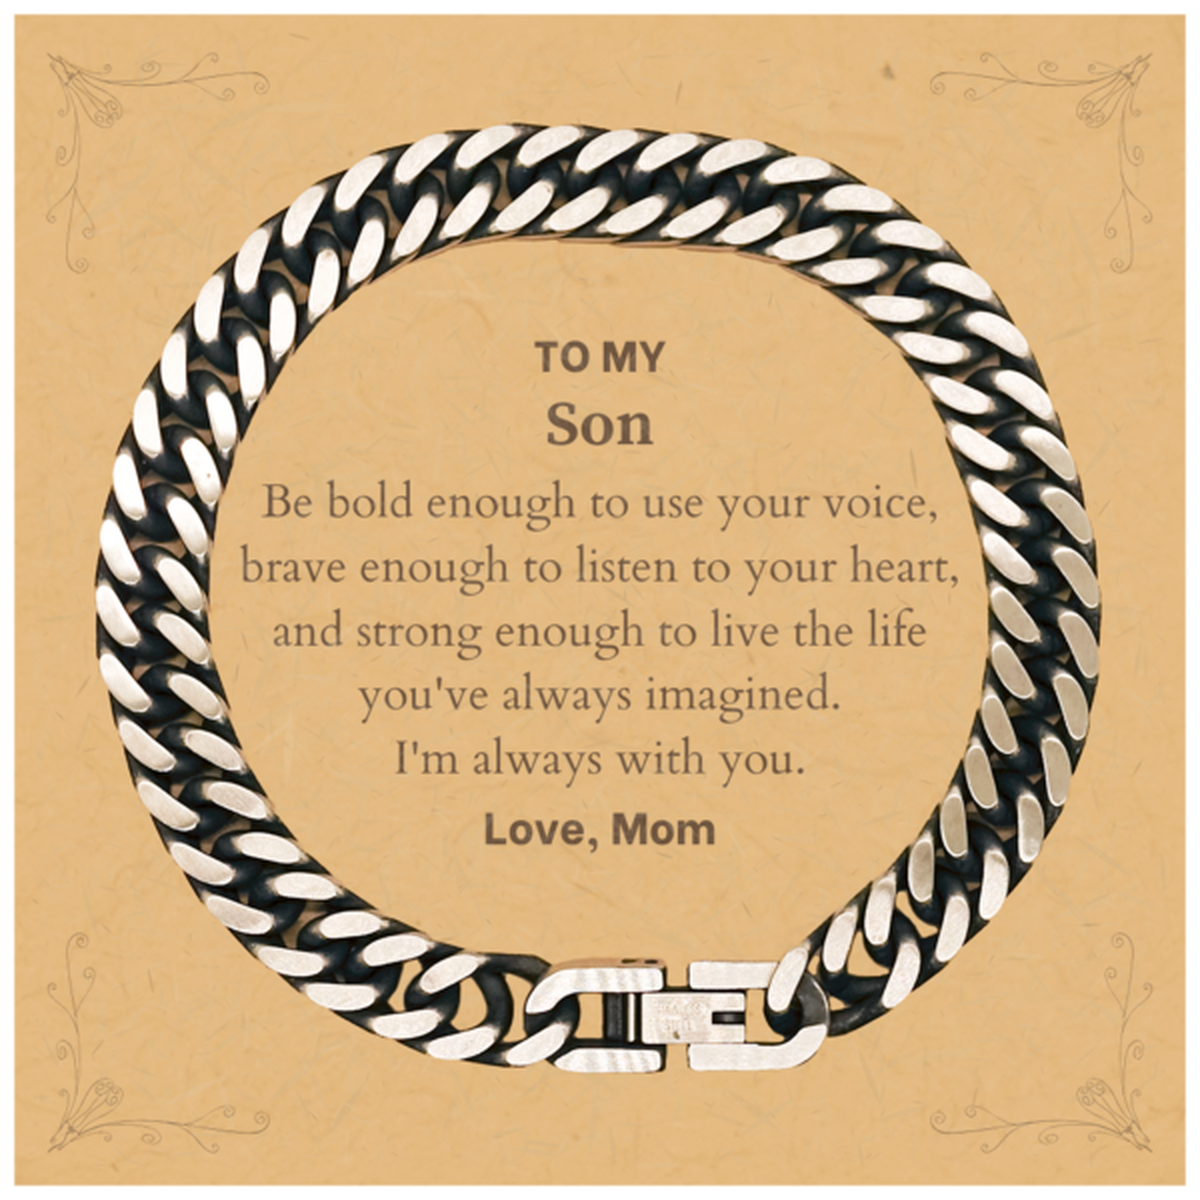 Keepsake Son Cuban Link Chain Bracelet Gift Idea Graduation Christmas Birthday Son from Mom, Son Be bold enough to use your voice, brave enough to listen to your heart. Love, Mom